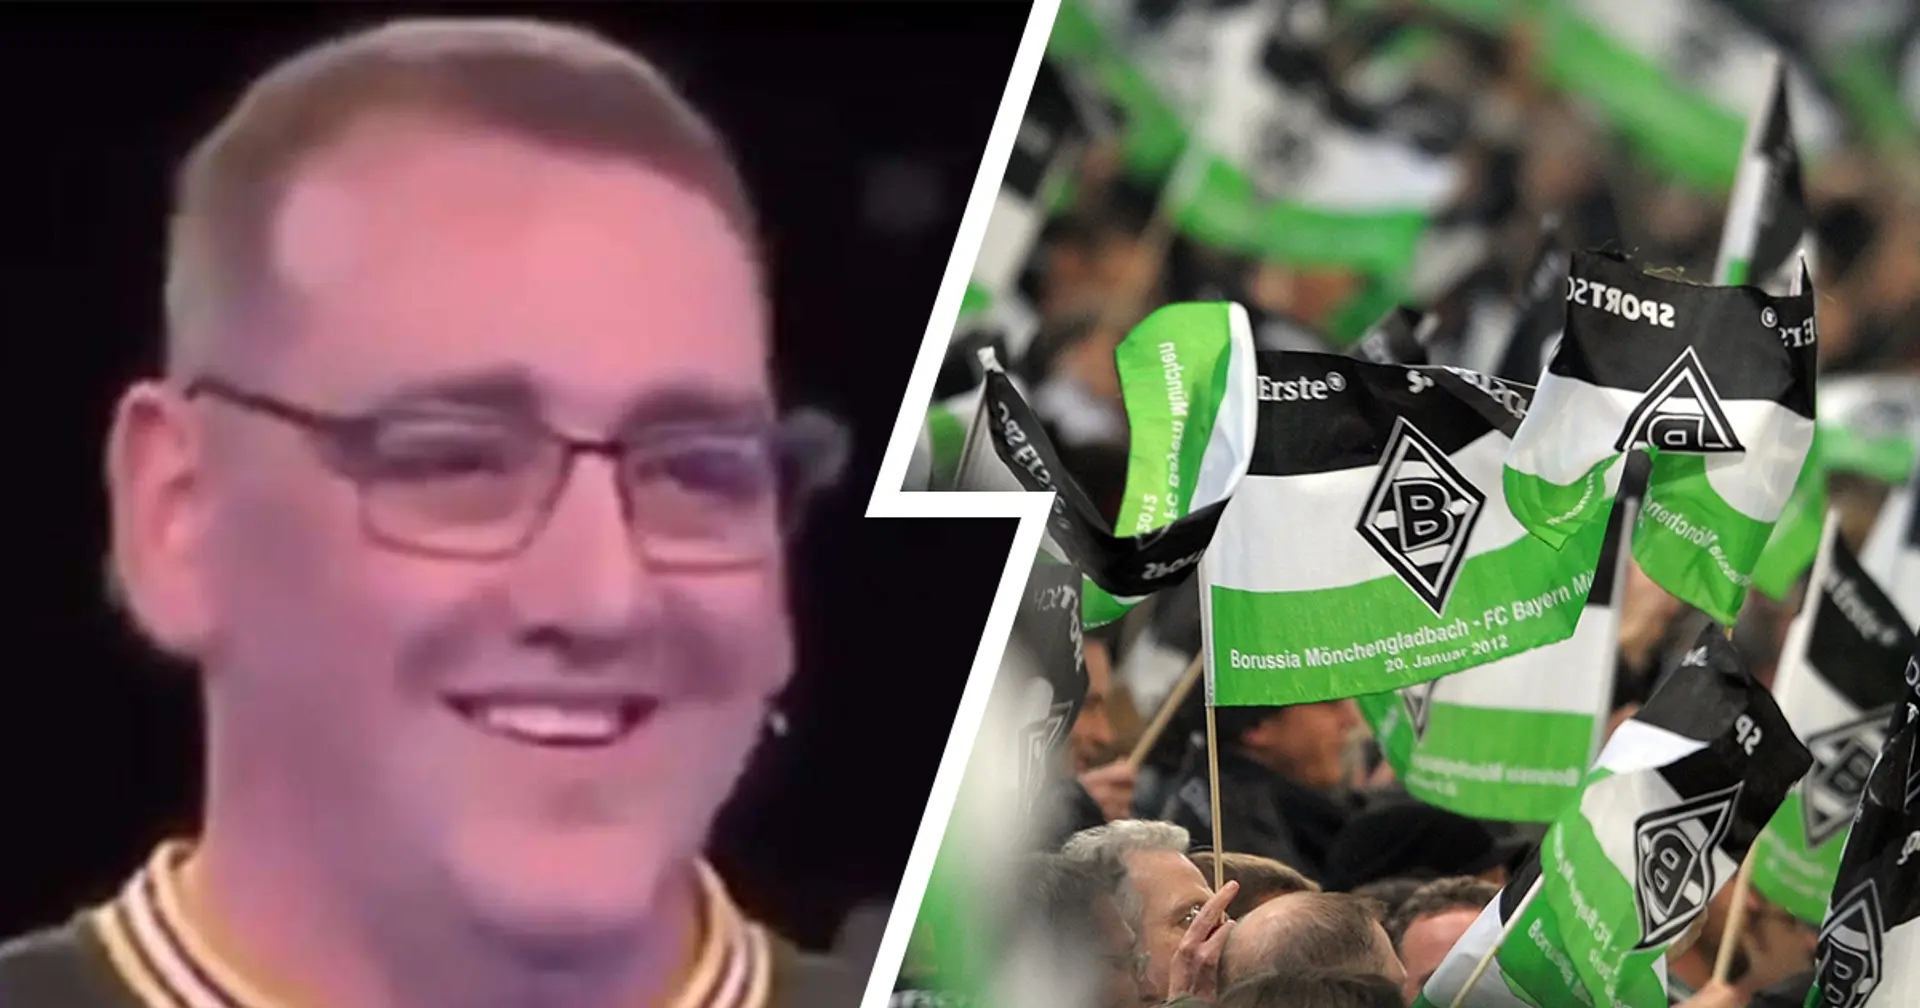 Rivalry more important than money: Monchengladbach fan hilariously refuses to say rival's name on German quiz